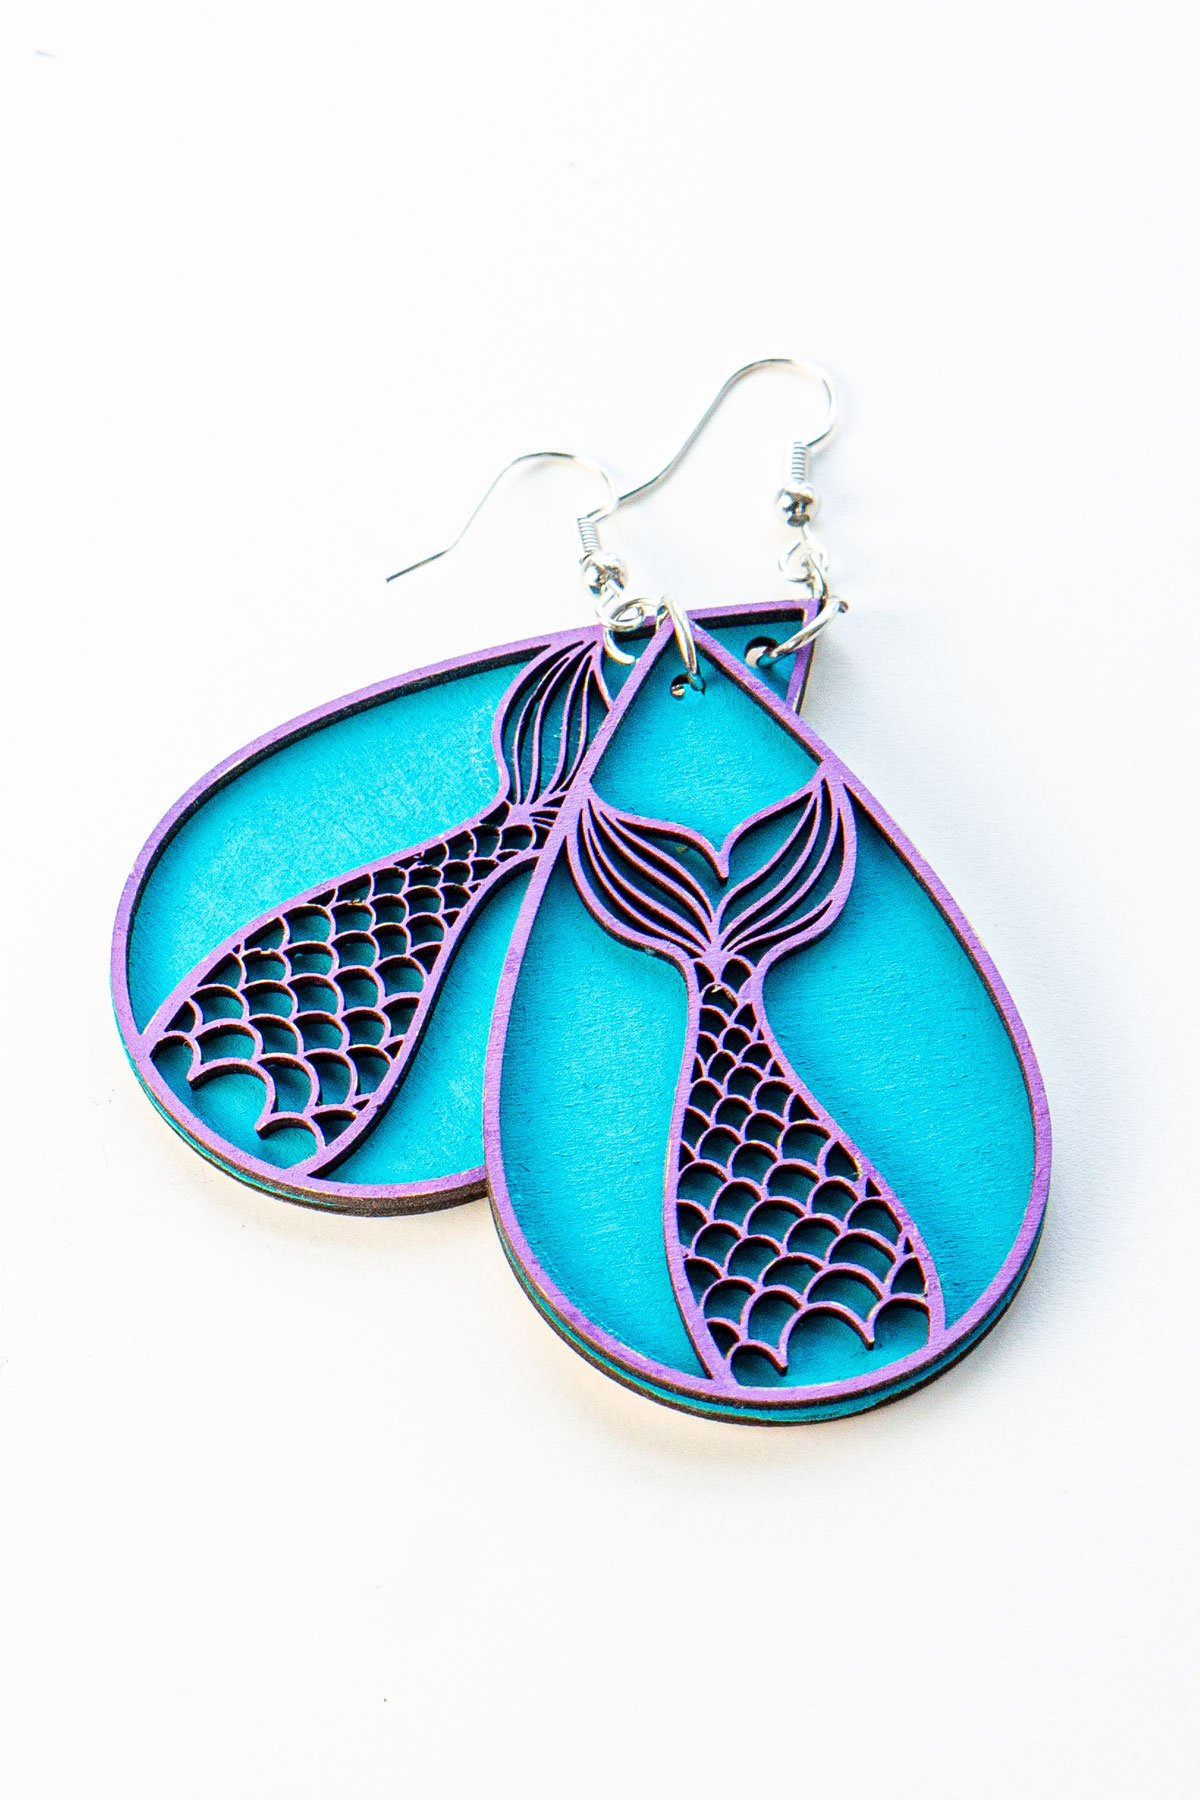 This is an image of a completed pair of wood earrings - tear drop mermaid tails - made with an xTools M1 laser machine. Learn how to make the wood earring in the post.